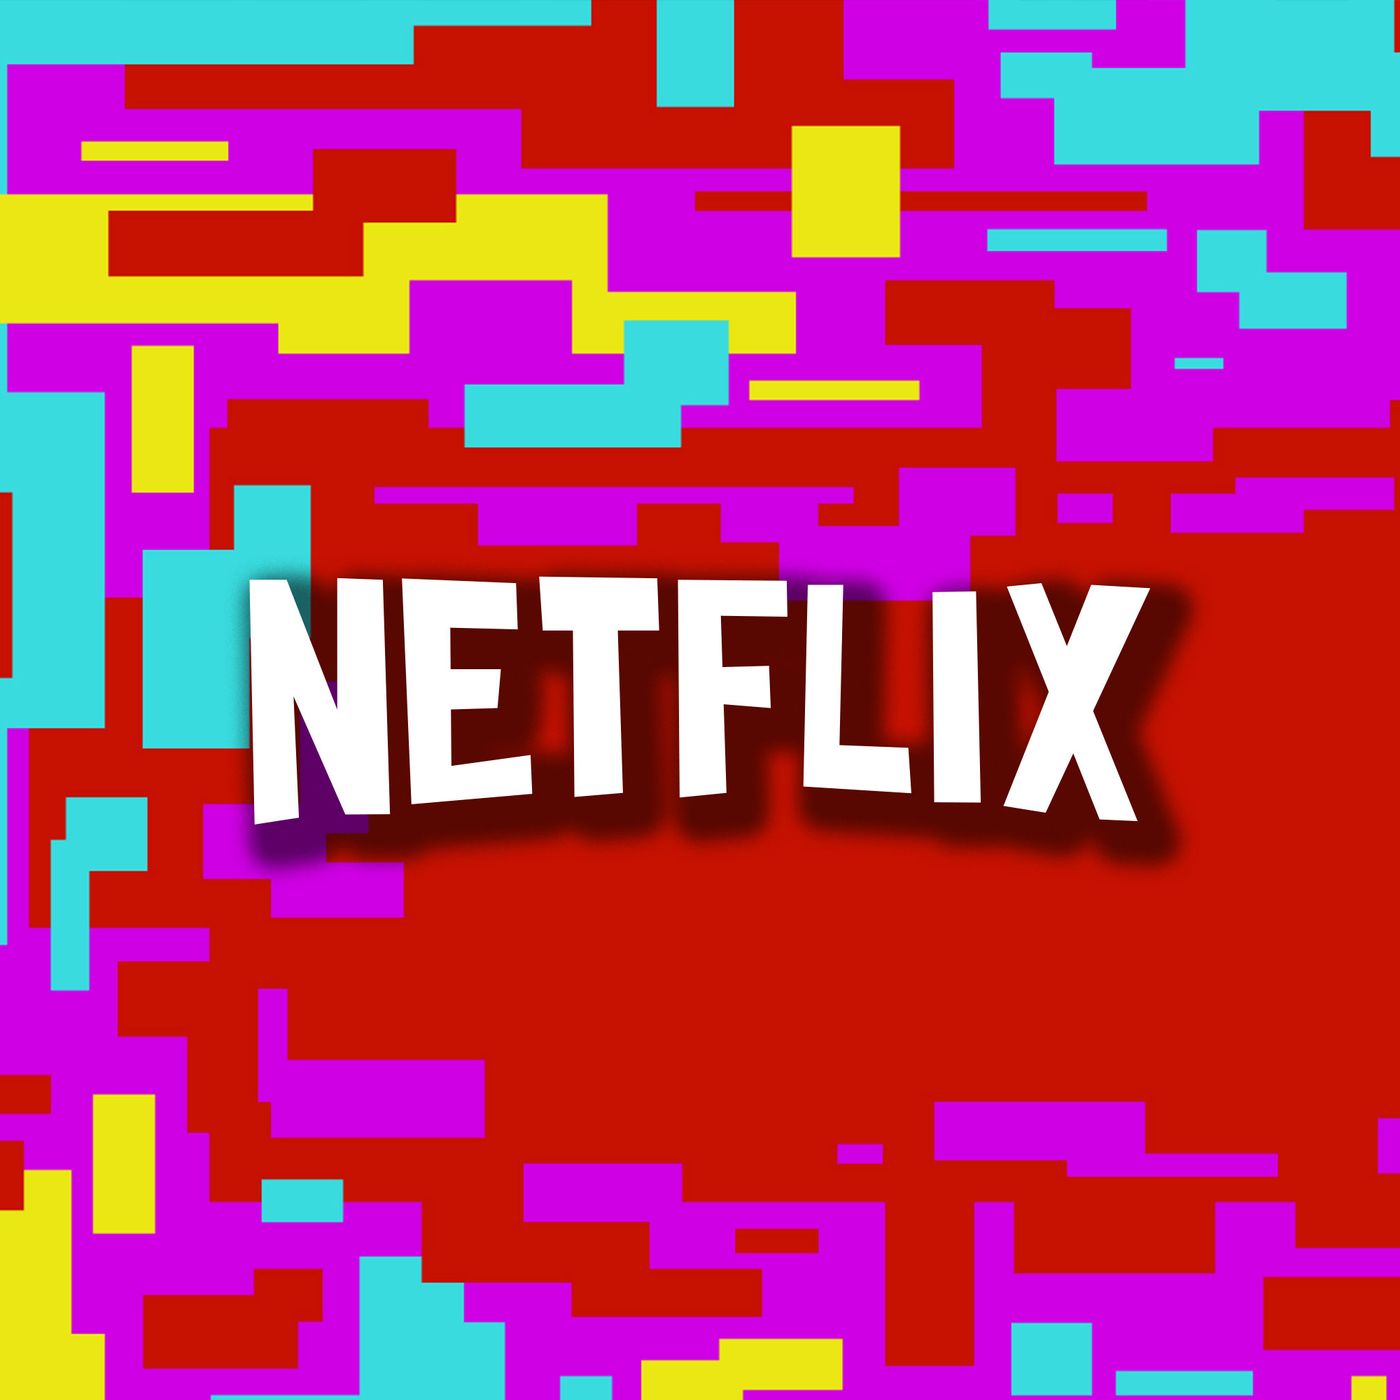 All the New Mobile Games Joining Netflix in October - About Netflix